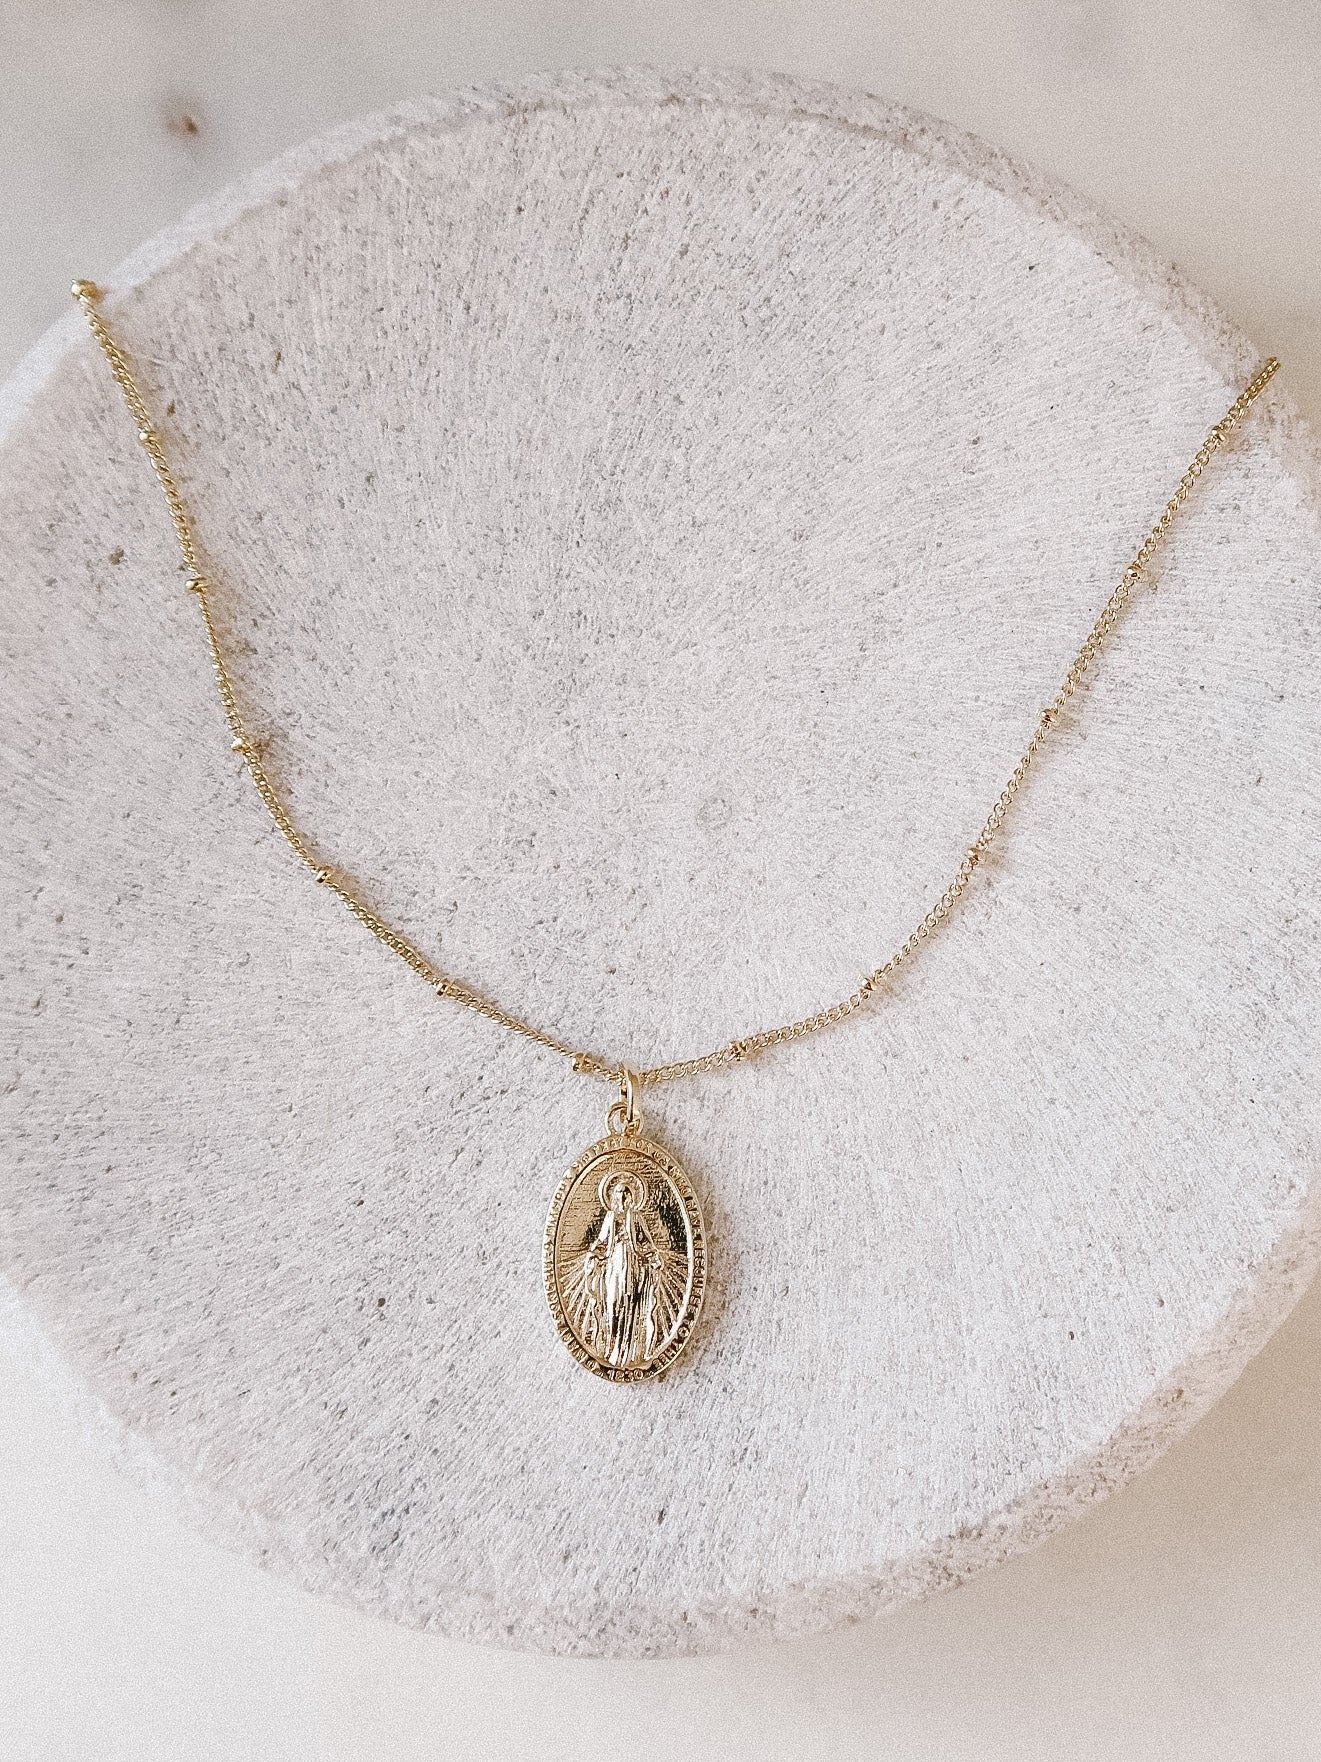 Miraculous_Medal_Gold_Filled_Necklace_Chain_Virgin_Mary_Satellite